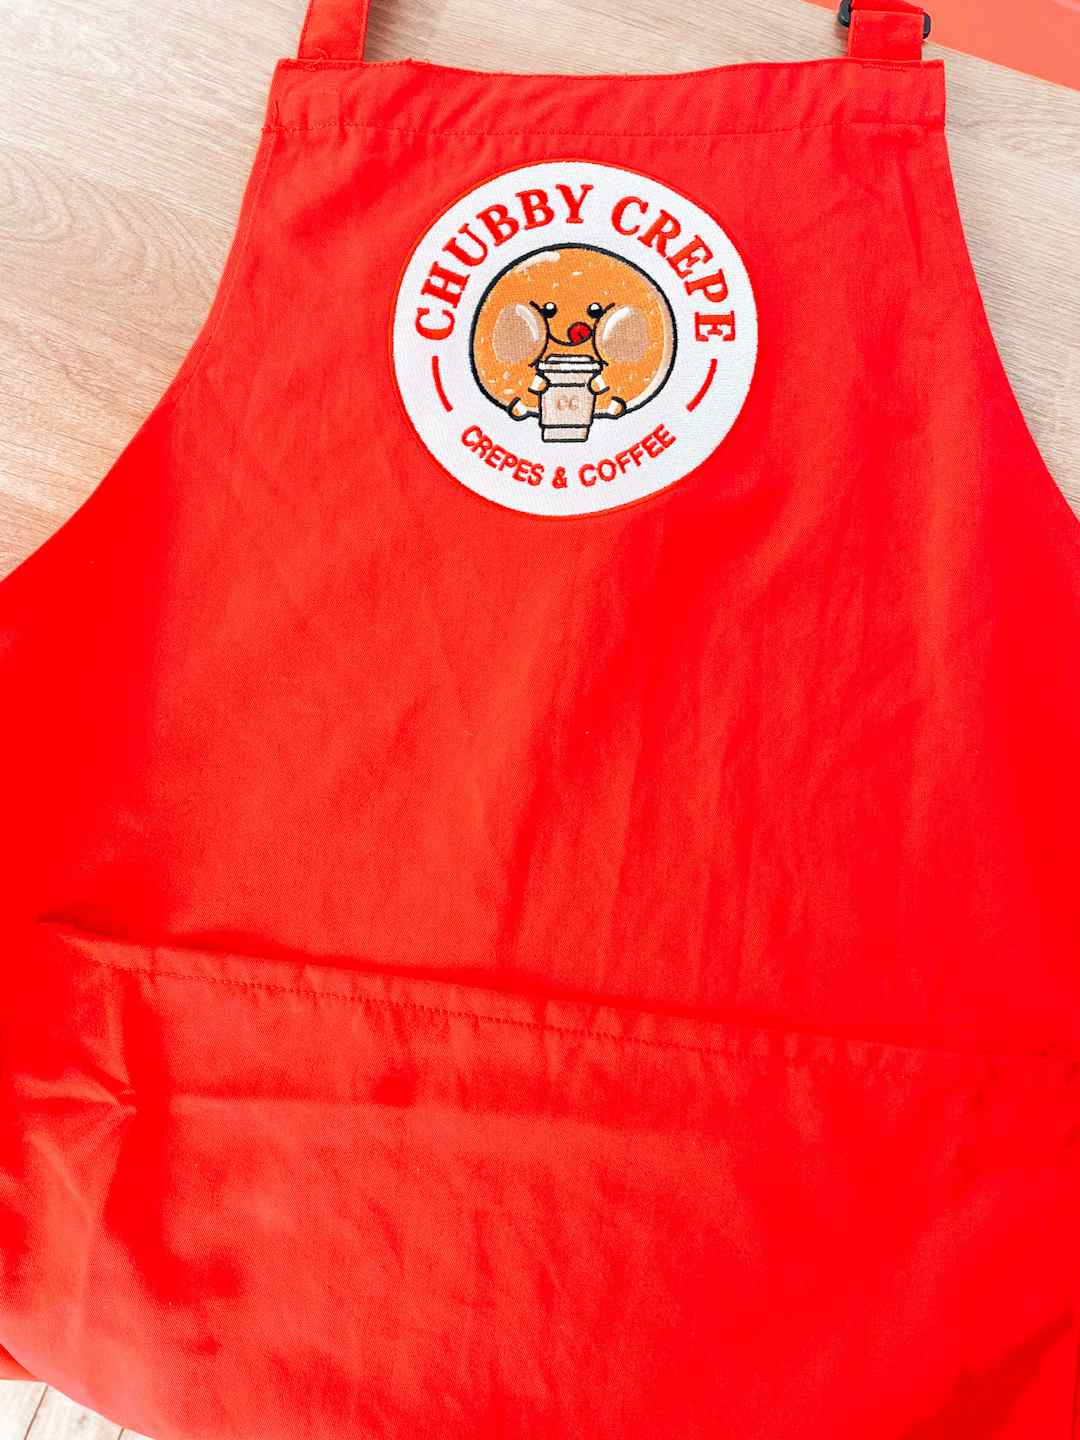 Hero image for supplier Yorkie Wrap Co